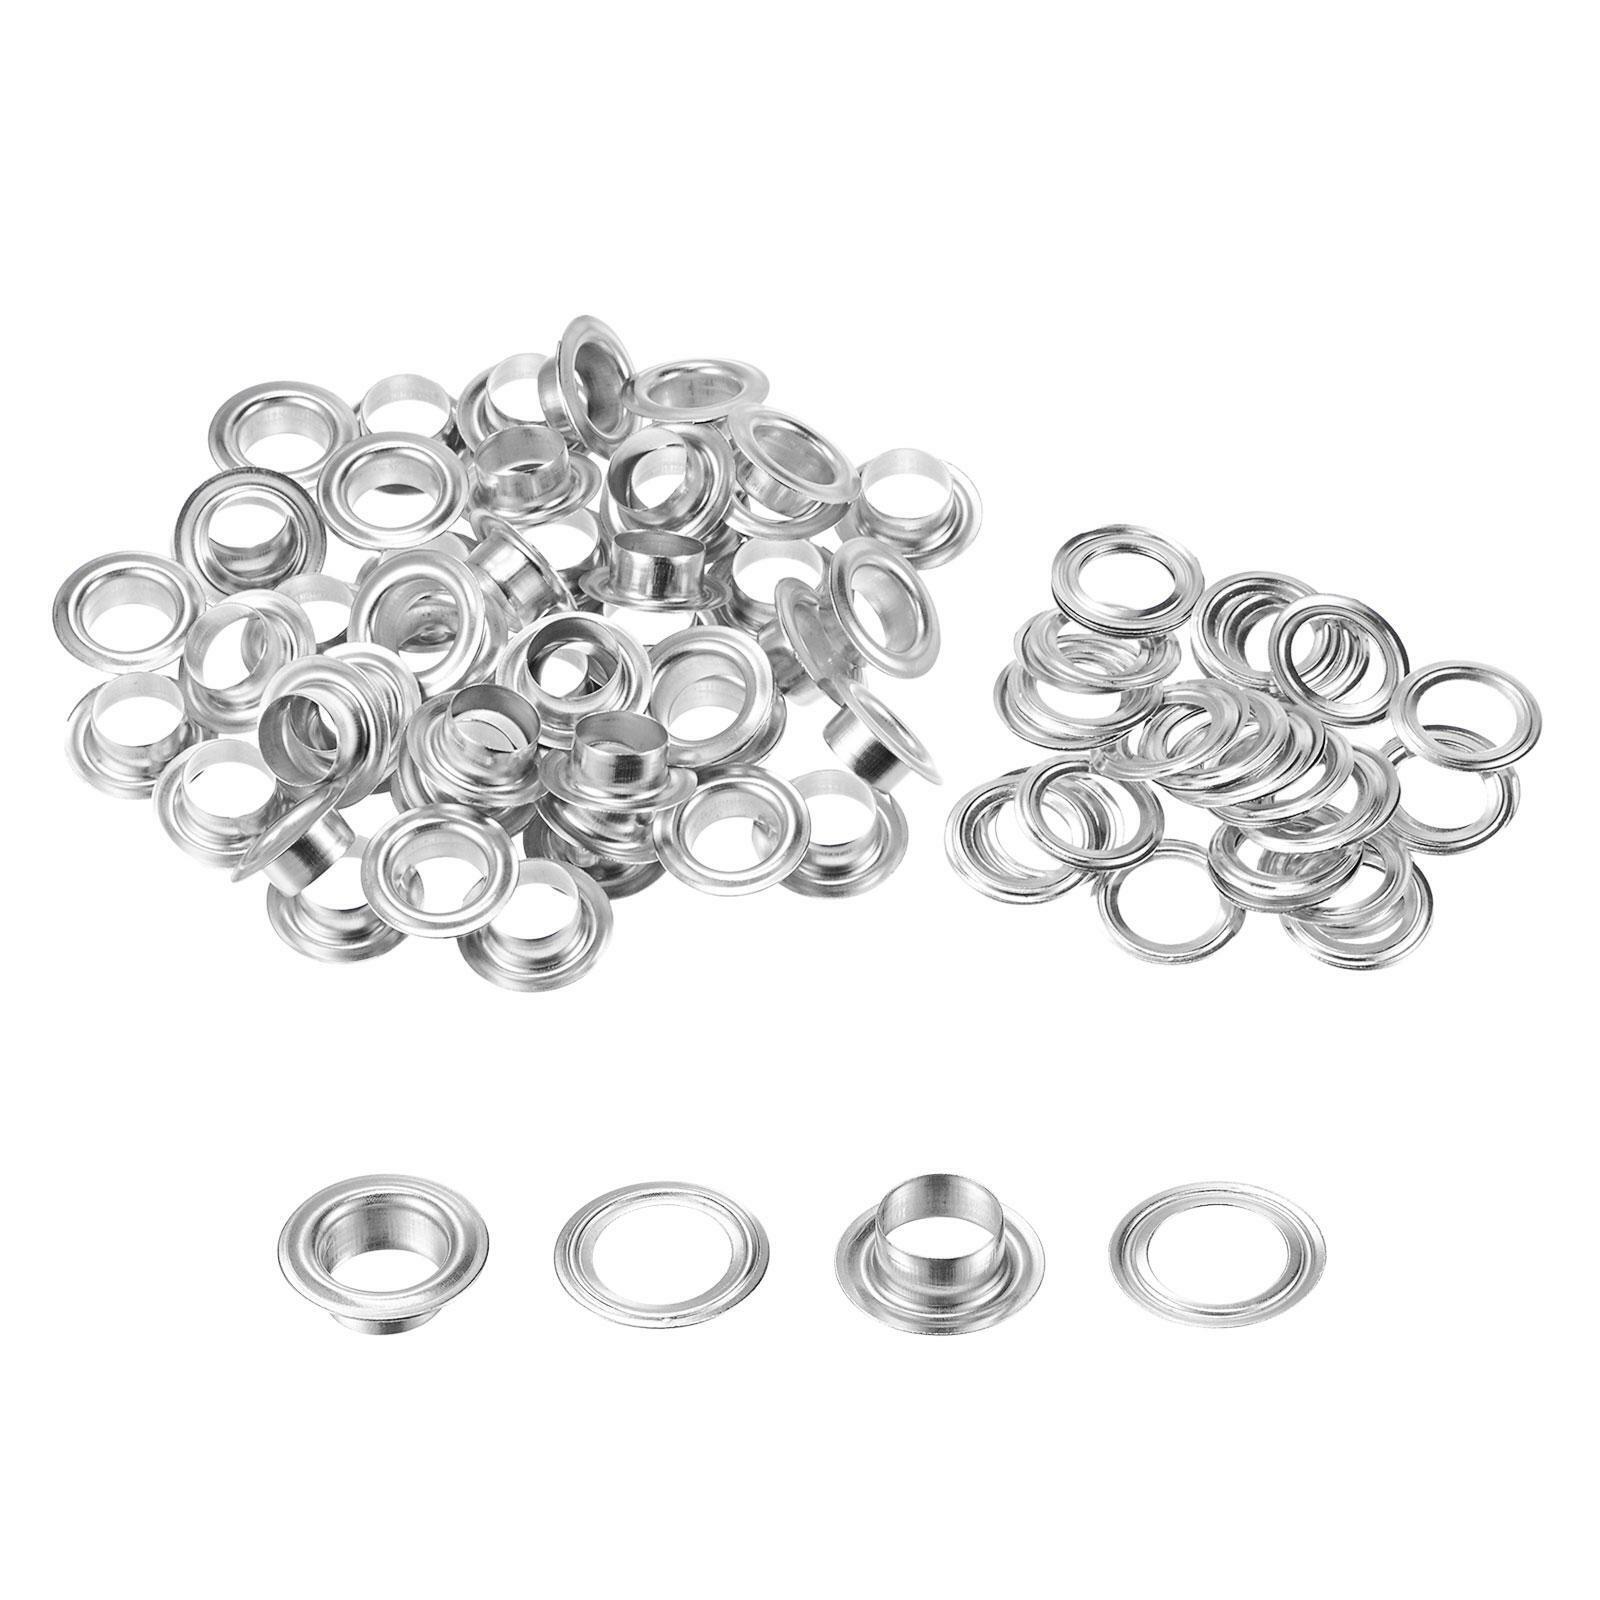 50Set 10.5mm Hole Copper Grommets Eyelets Silver Tone for Fabric Leather